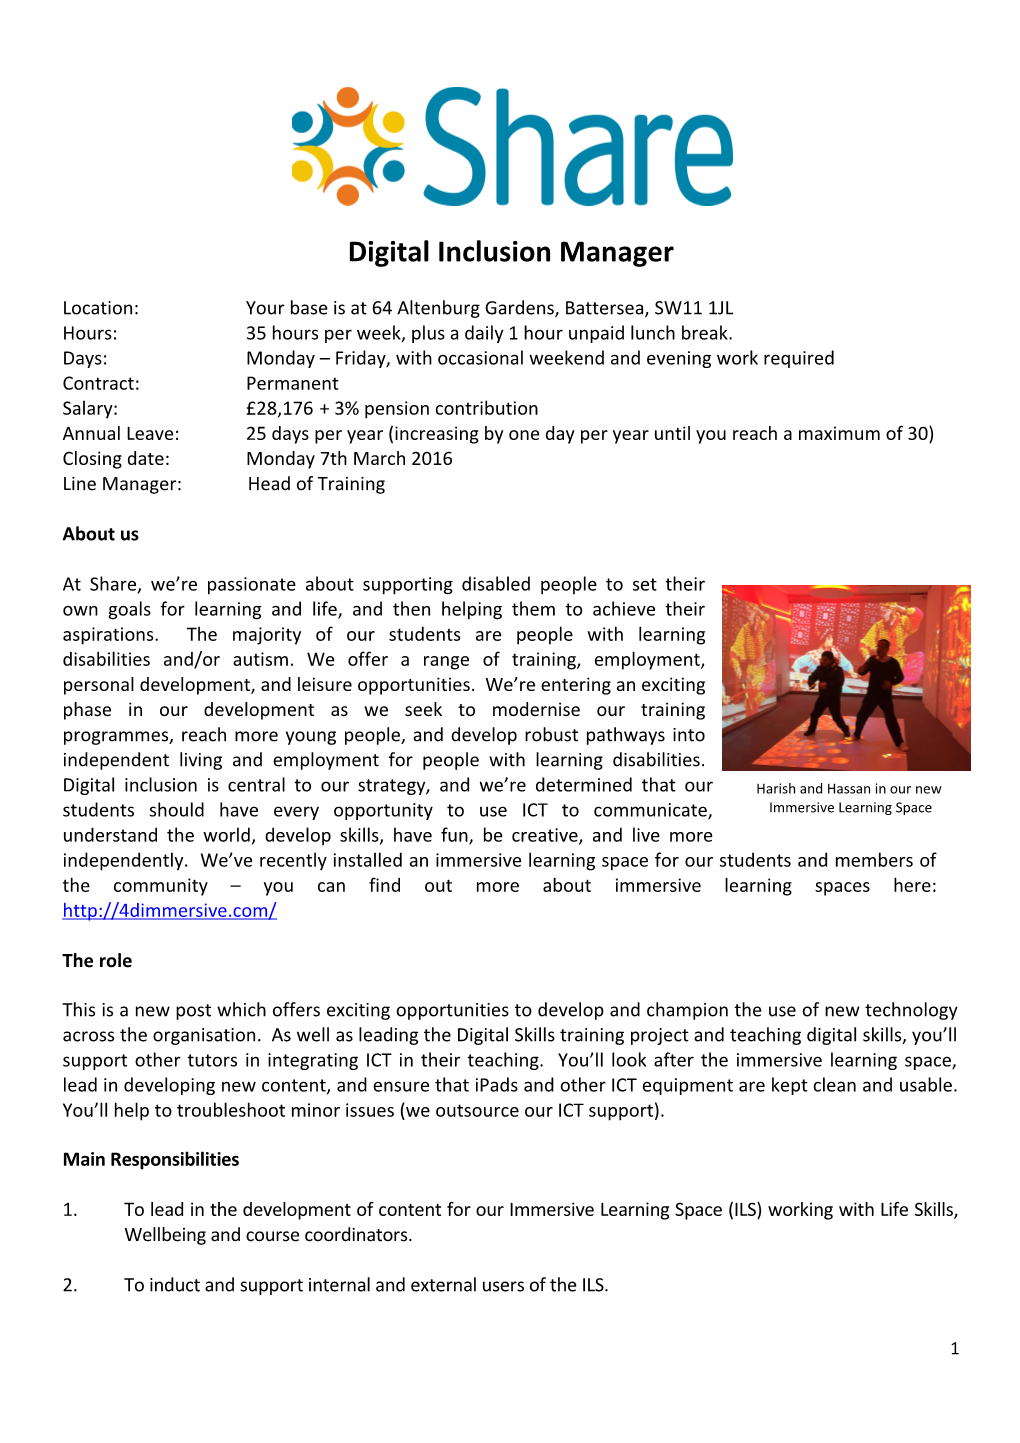 Digital Inclusion Manager